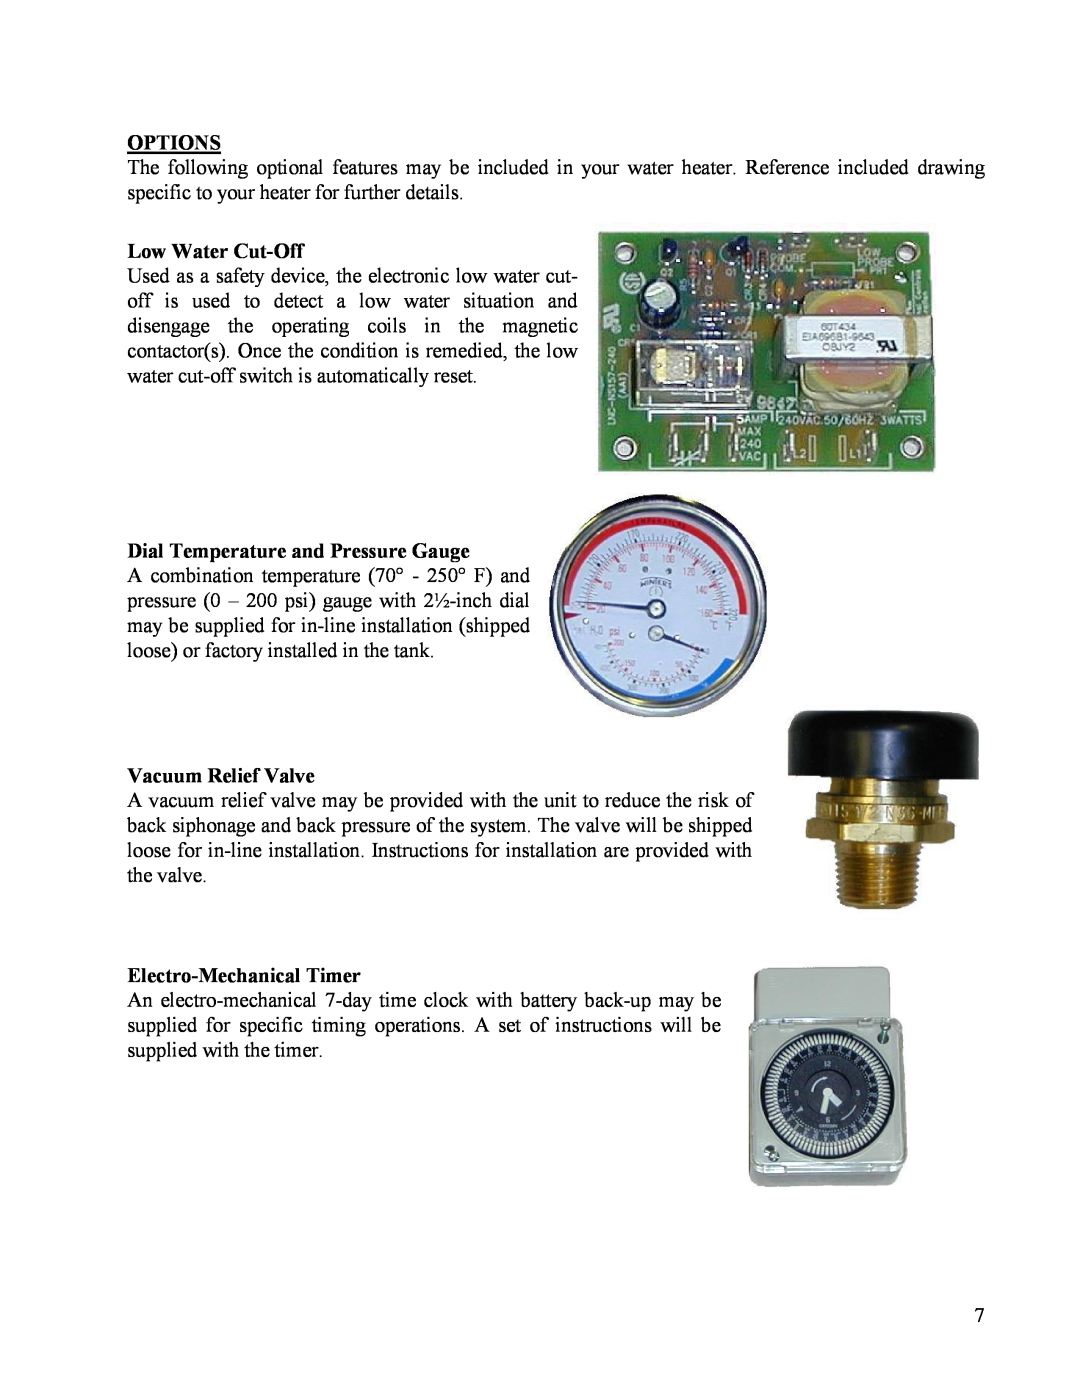 Hubbell Electric Heater Company ME Options, Low Water Cut-Off, Dial Temperature and Pressure Gauge, Vacuum Relief Valve 